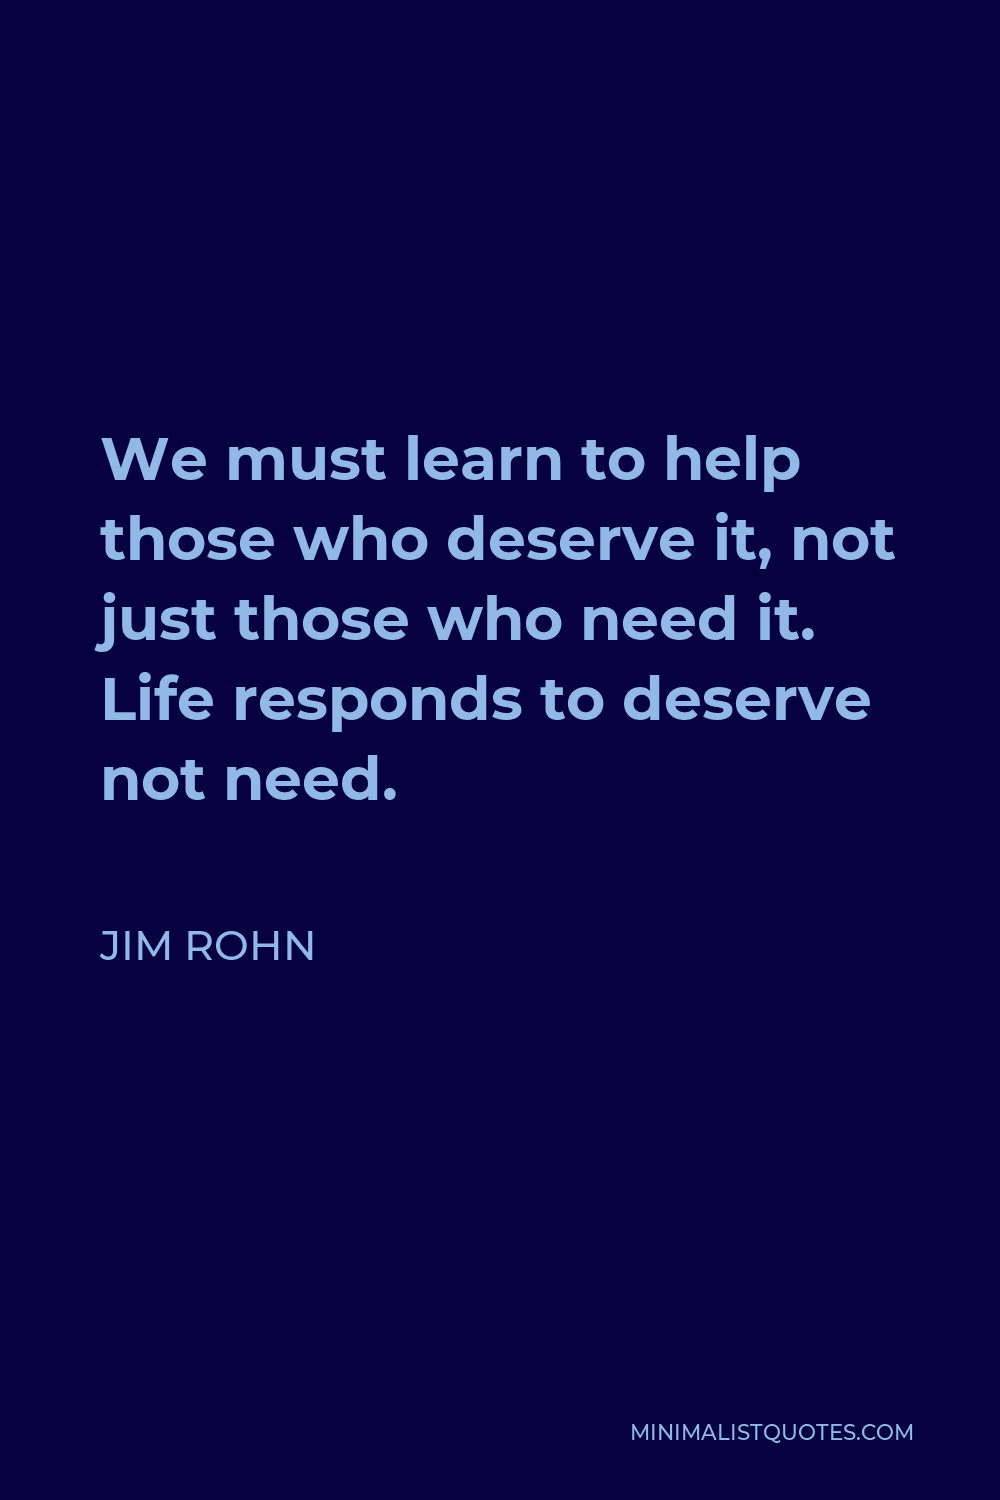 Jim Rohn Quote - We must learn to help those who deserve it, not just those who need it. Life responds to deserve not need.